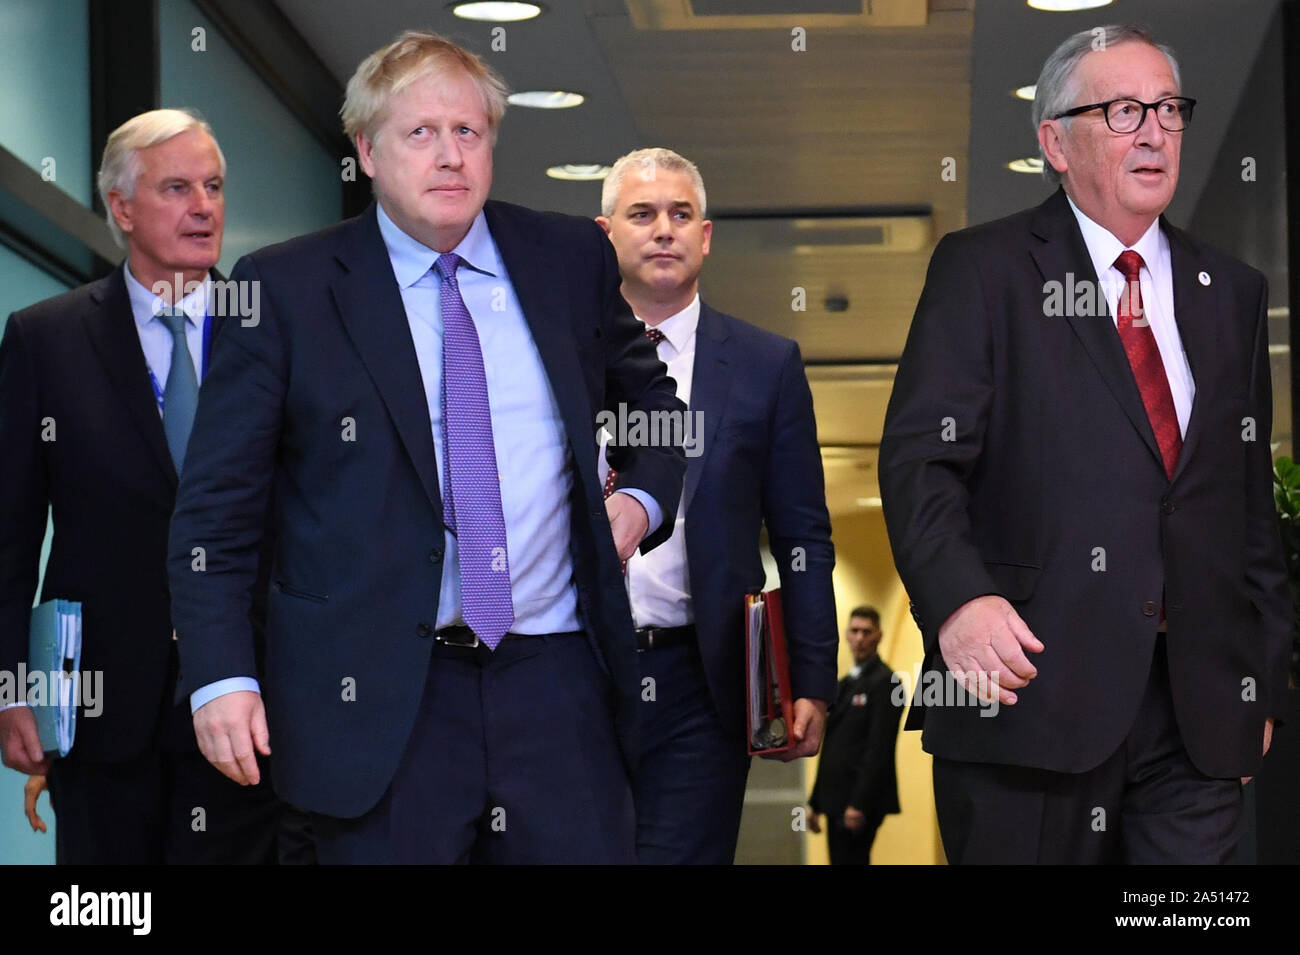 Michel Barnier, the EU's Chief Brexit Negotiator, Prime Minister Boris Johnson, Brexit Secretary Stephen Barclay and Jean-Claude Juncker, President of the European Commission, ahead of the opening sessions of the European Council summit at EU headquarters in Brussels. Stock Photo